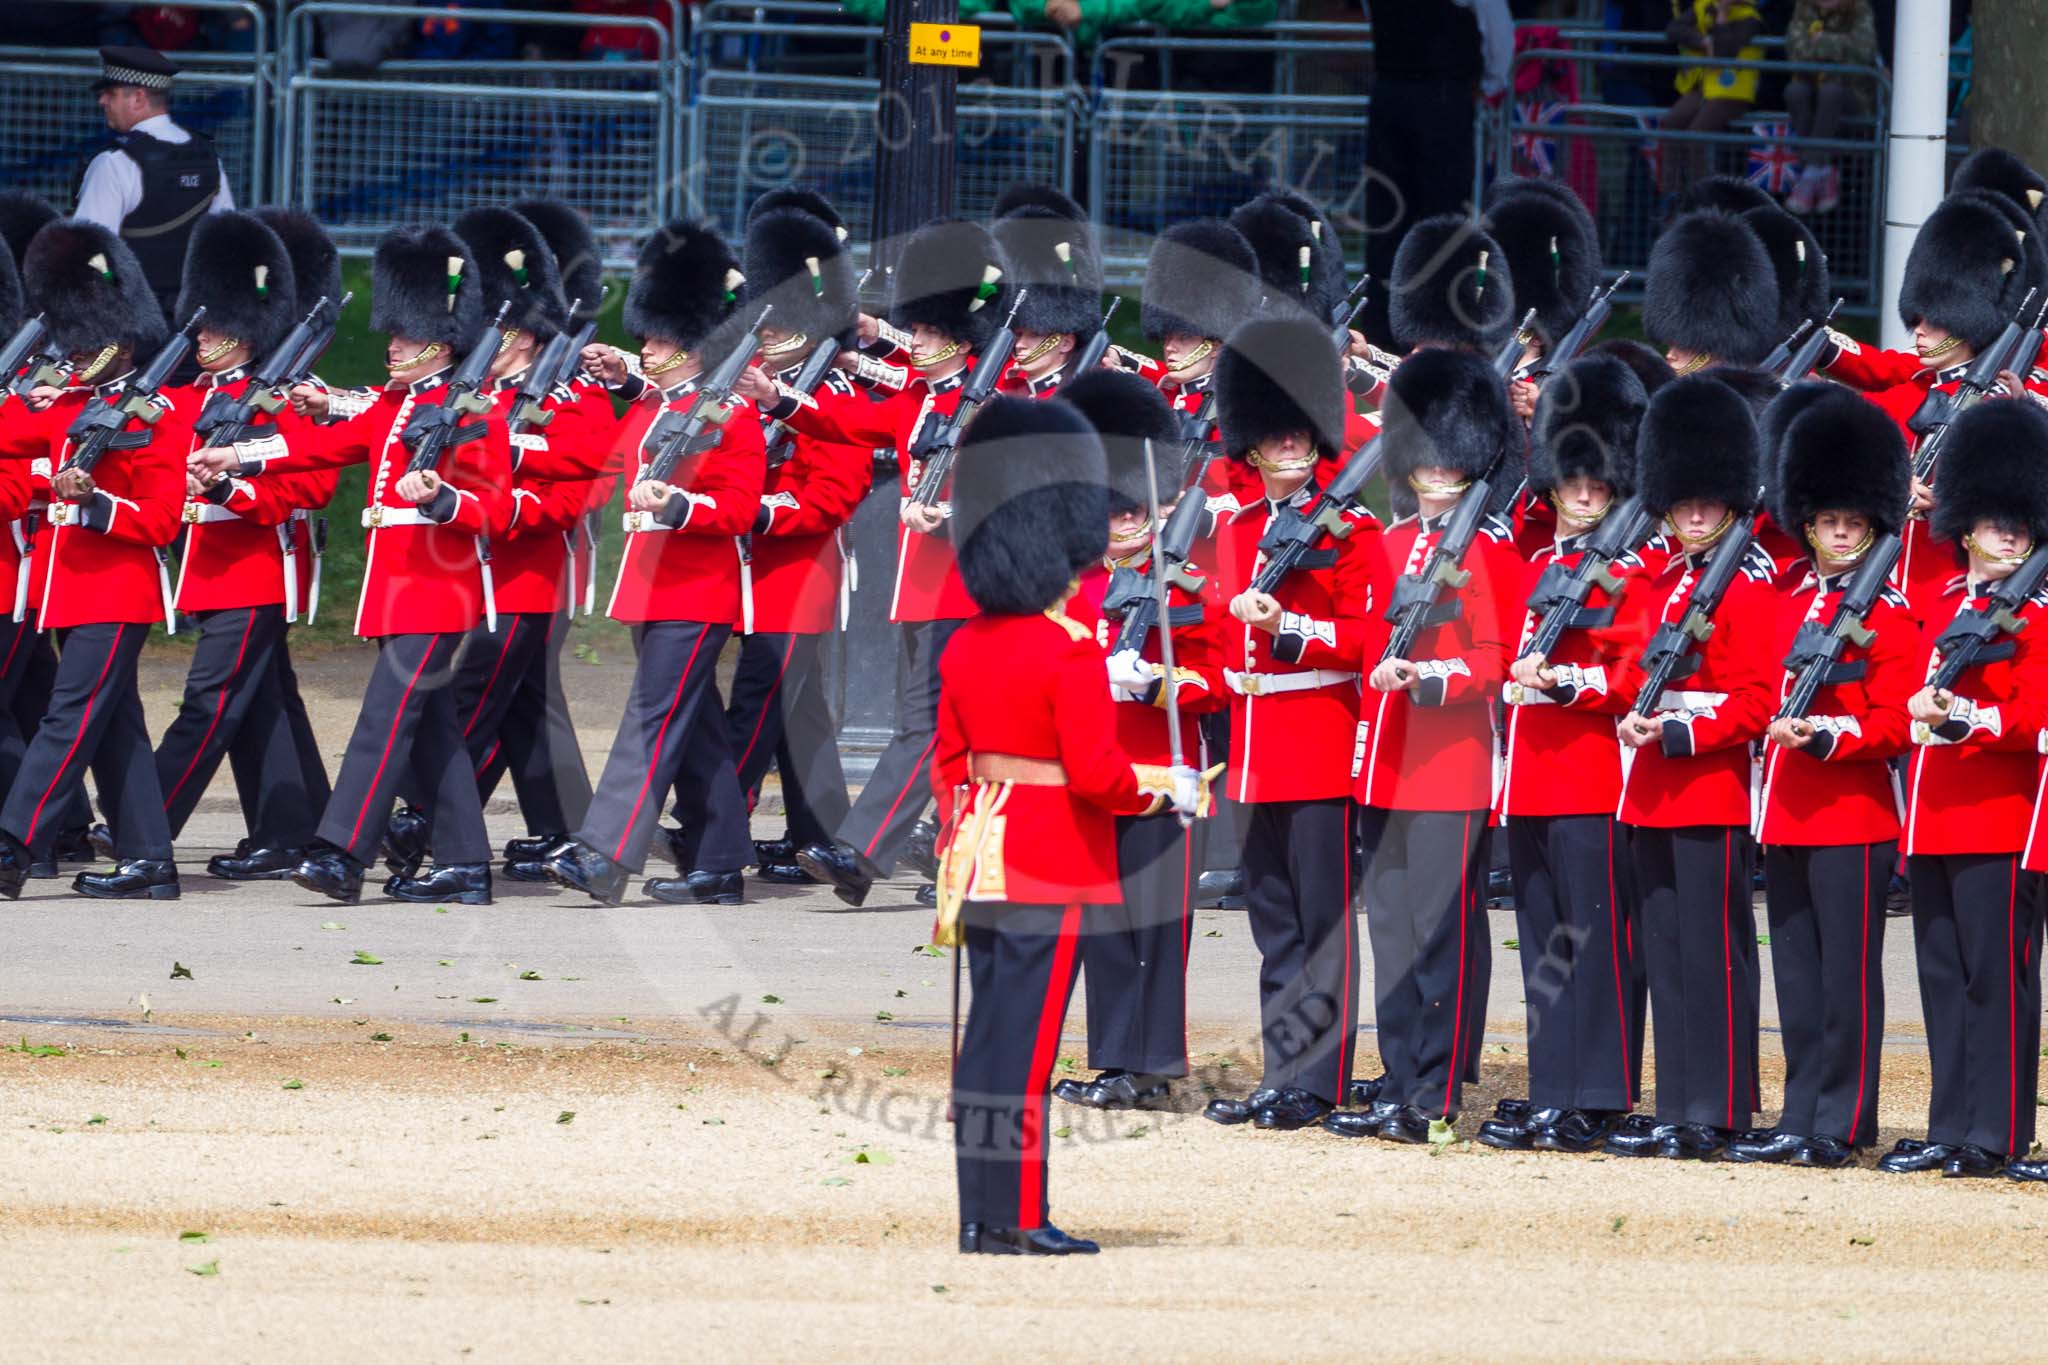 The Colonel's Review 2015.
Horse Guards Parade, Westminster,
London,

United Kingdom,
on 06 June 2015 at 10:27, image #71